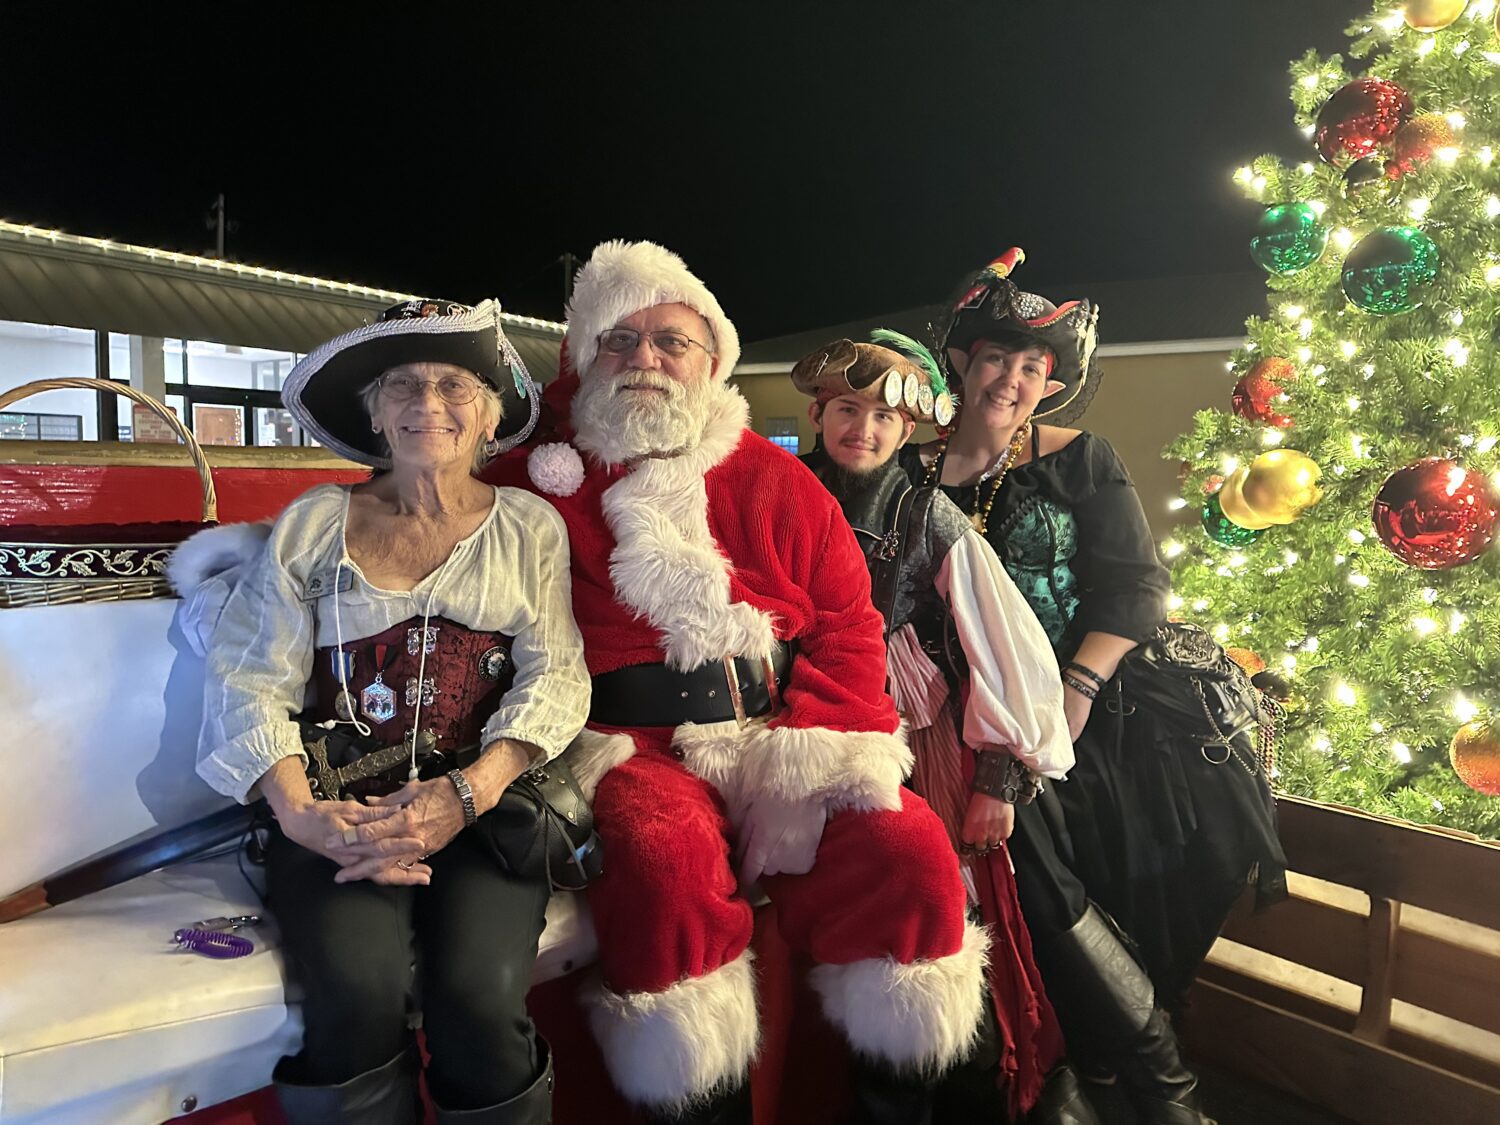 Privateers, Christmas on Bridge Street deliver festive time